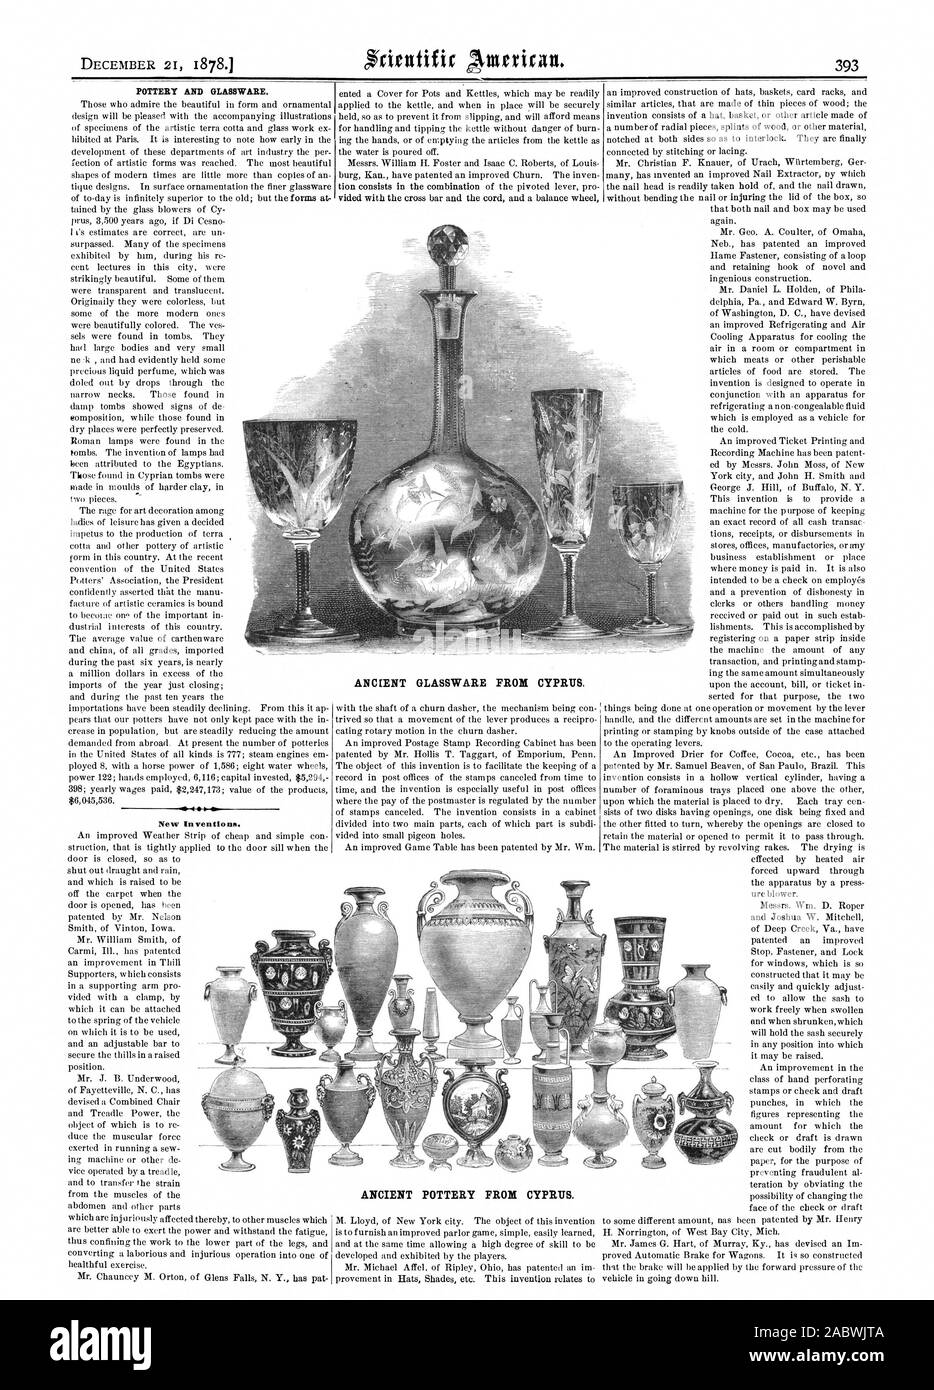 POTTERY AND GLASSWARE. .10. New Inventions. ANCIENT GLASSWARE FROM CYPRUS. ANCIENT POTTERY FROM CYPRUS., scientific american, 1878-12-21 Stock Photo